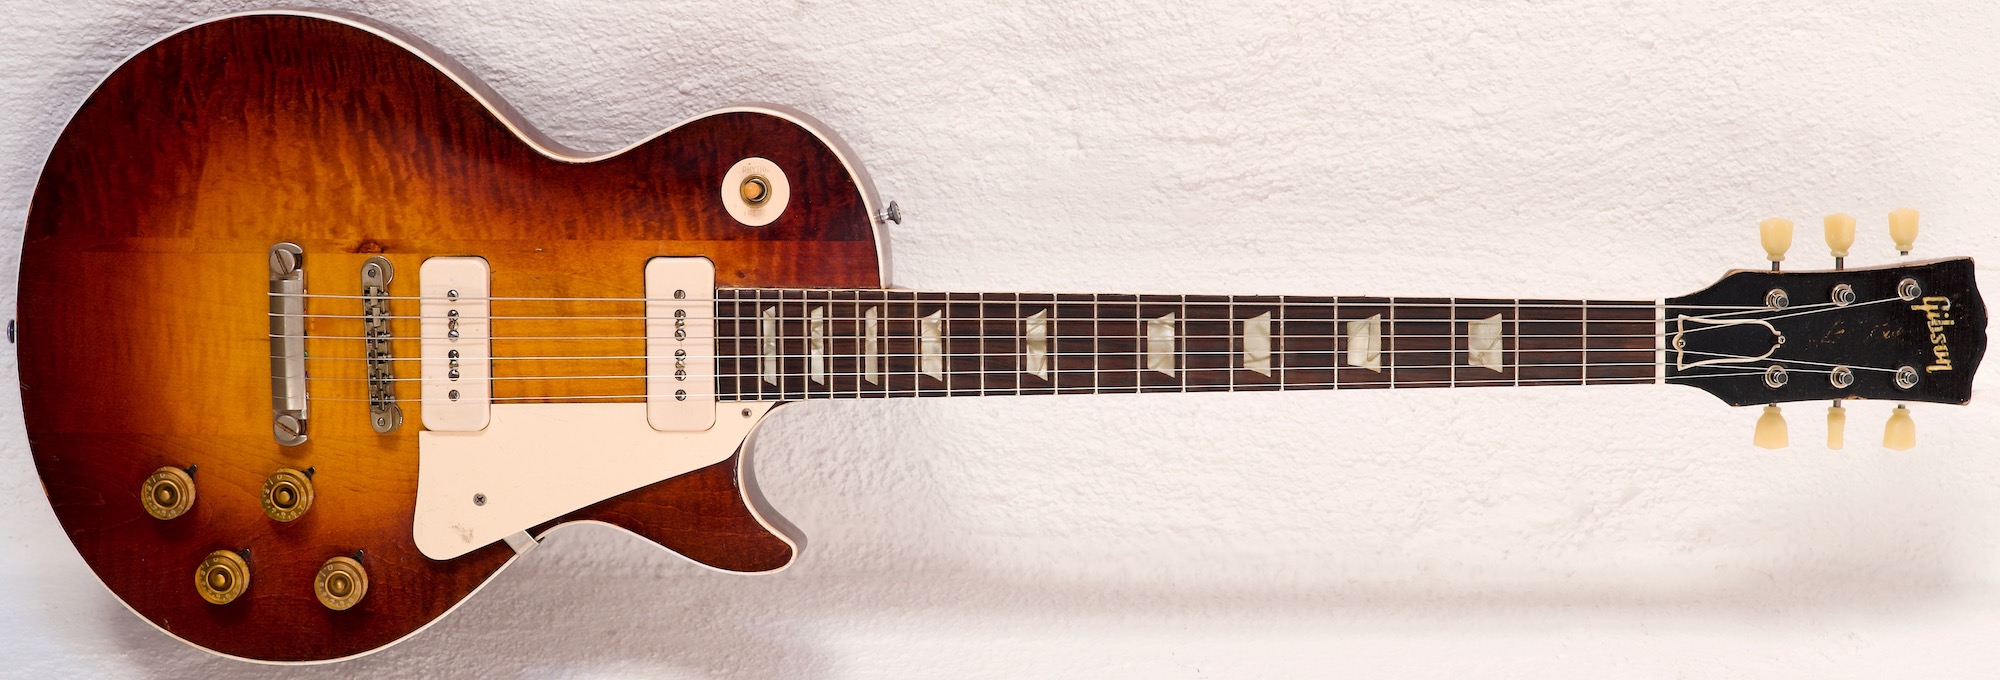 Gibson Les Paul from 1954